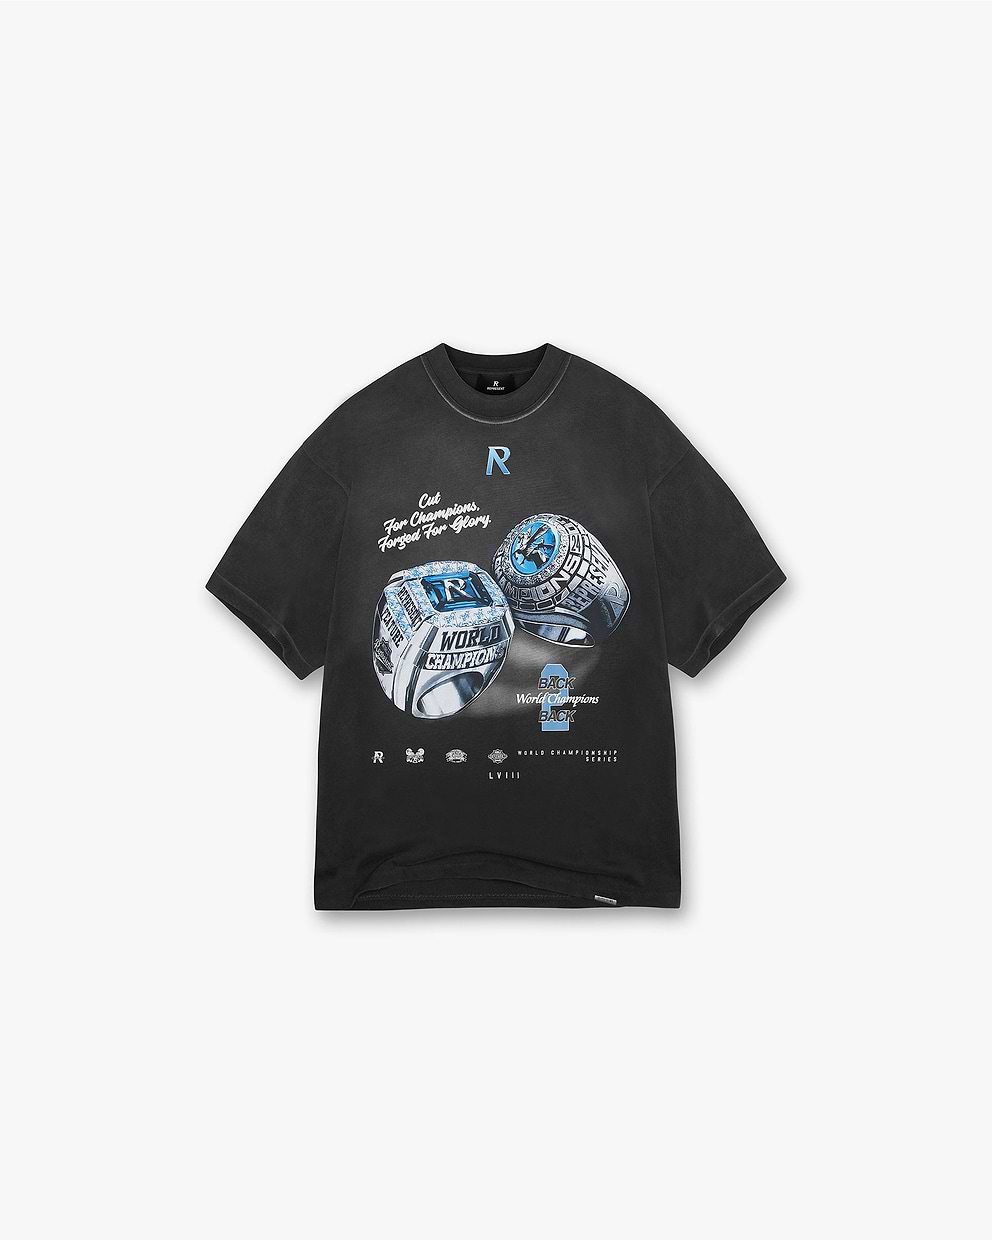 Represent X Feature Champion Rings T-Shirt - Stained Black